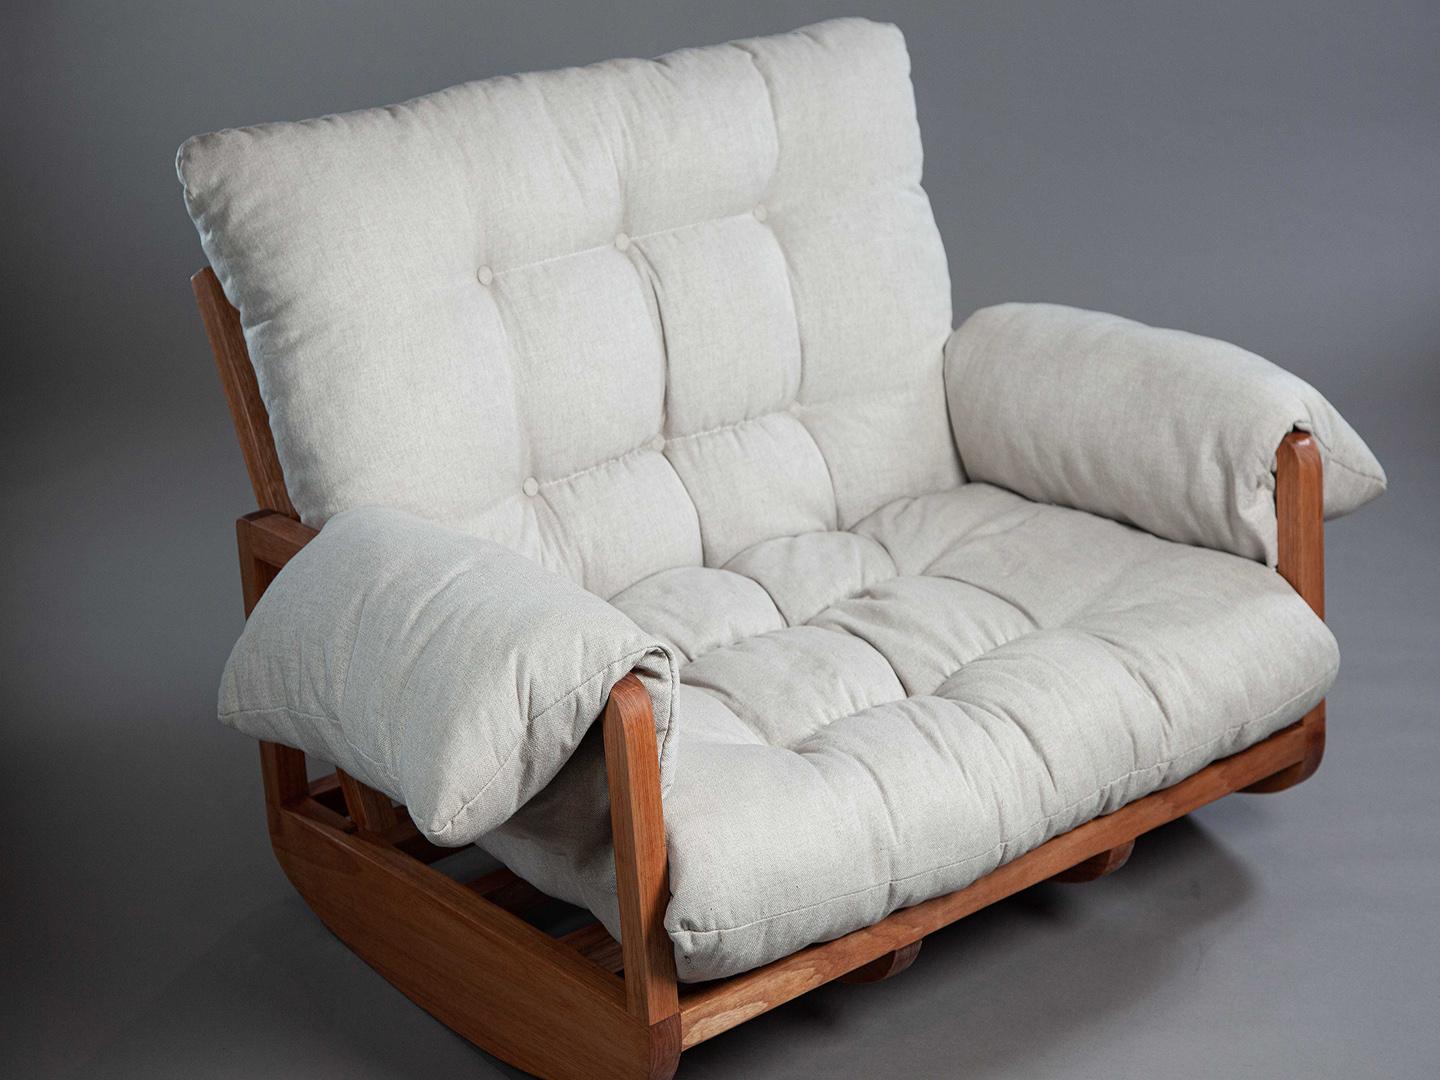 Brazilian The Laziness Armchair. Rocking sofa in solid wood, upholstered in linen. For Sale